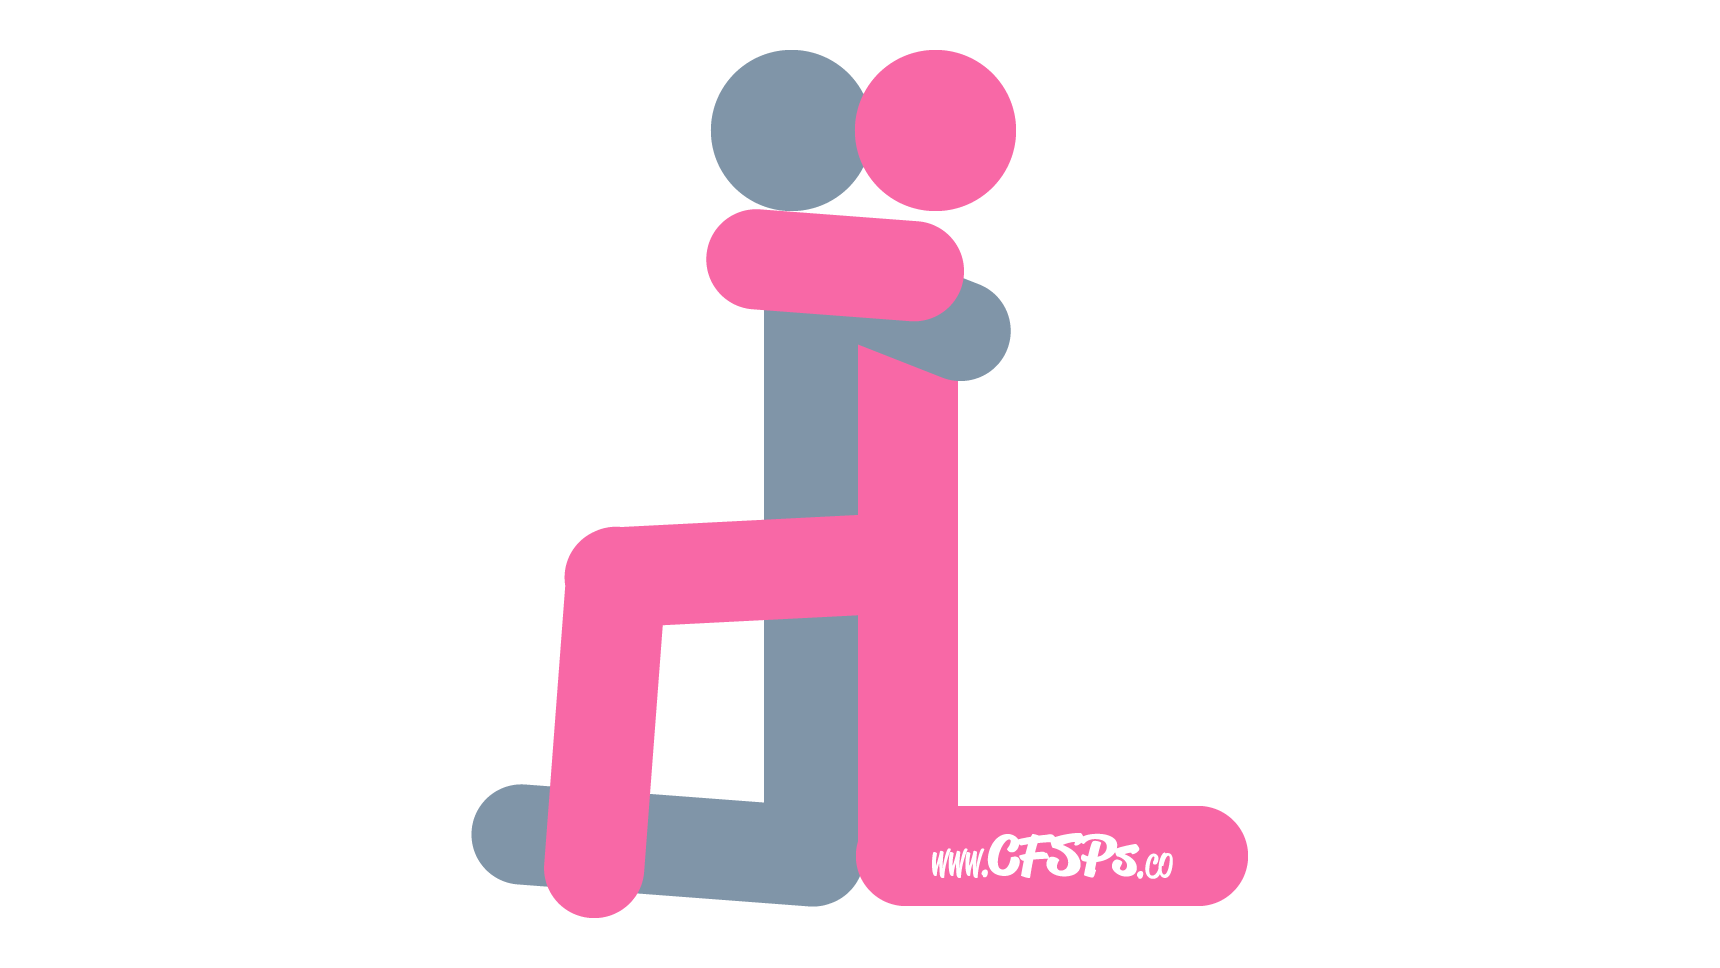 This stick figure image depicts a man and woman having sex in the Long Goodbye sex position. The man is kneeling on one knee with his other leg up and foot on the ground. The woman is kneeling on one knee with her other leg up and foot on the floor while facing him. Their pelvises are touching, and they are hugging.